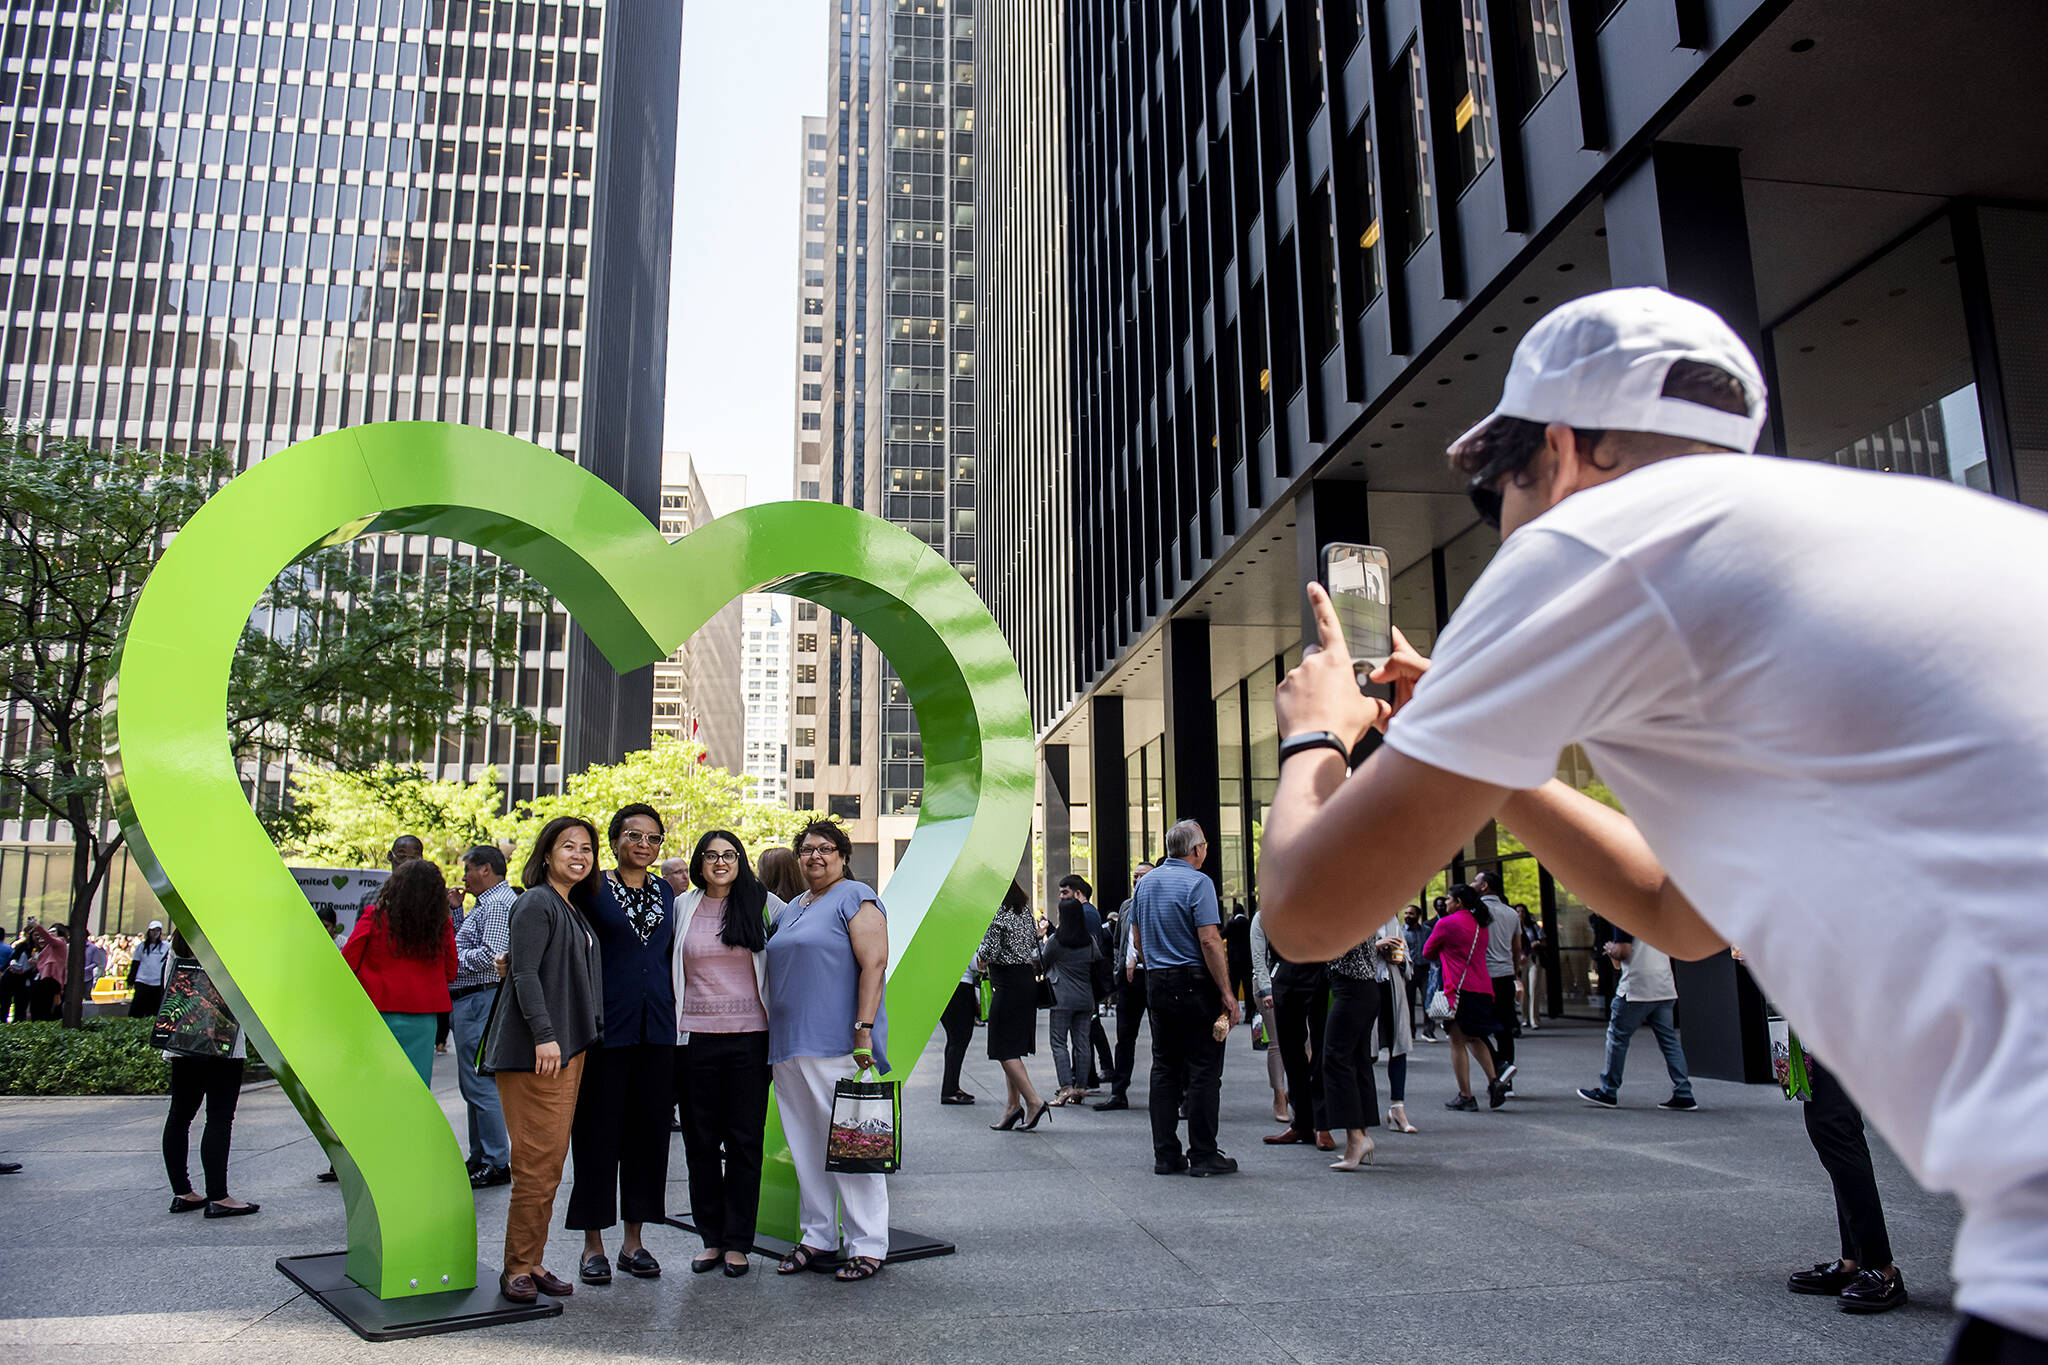 A giant green heart arch has popped up in Toronto's financial district thanks to the #TDReunited festival